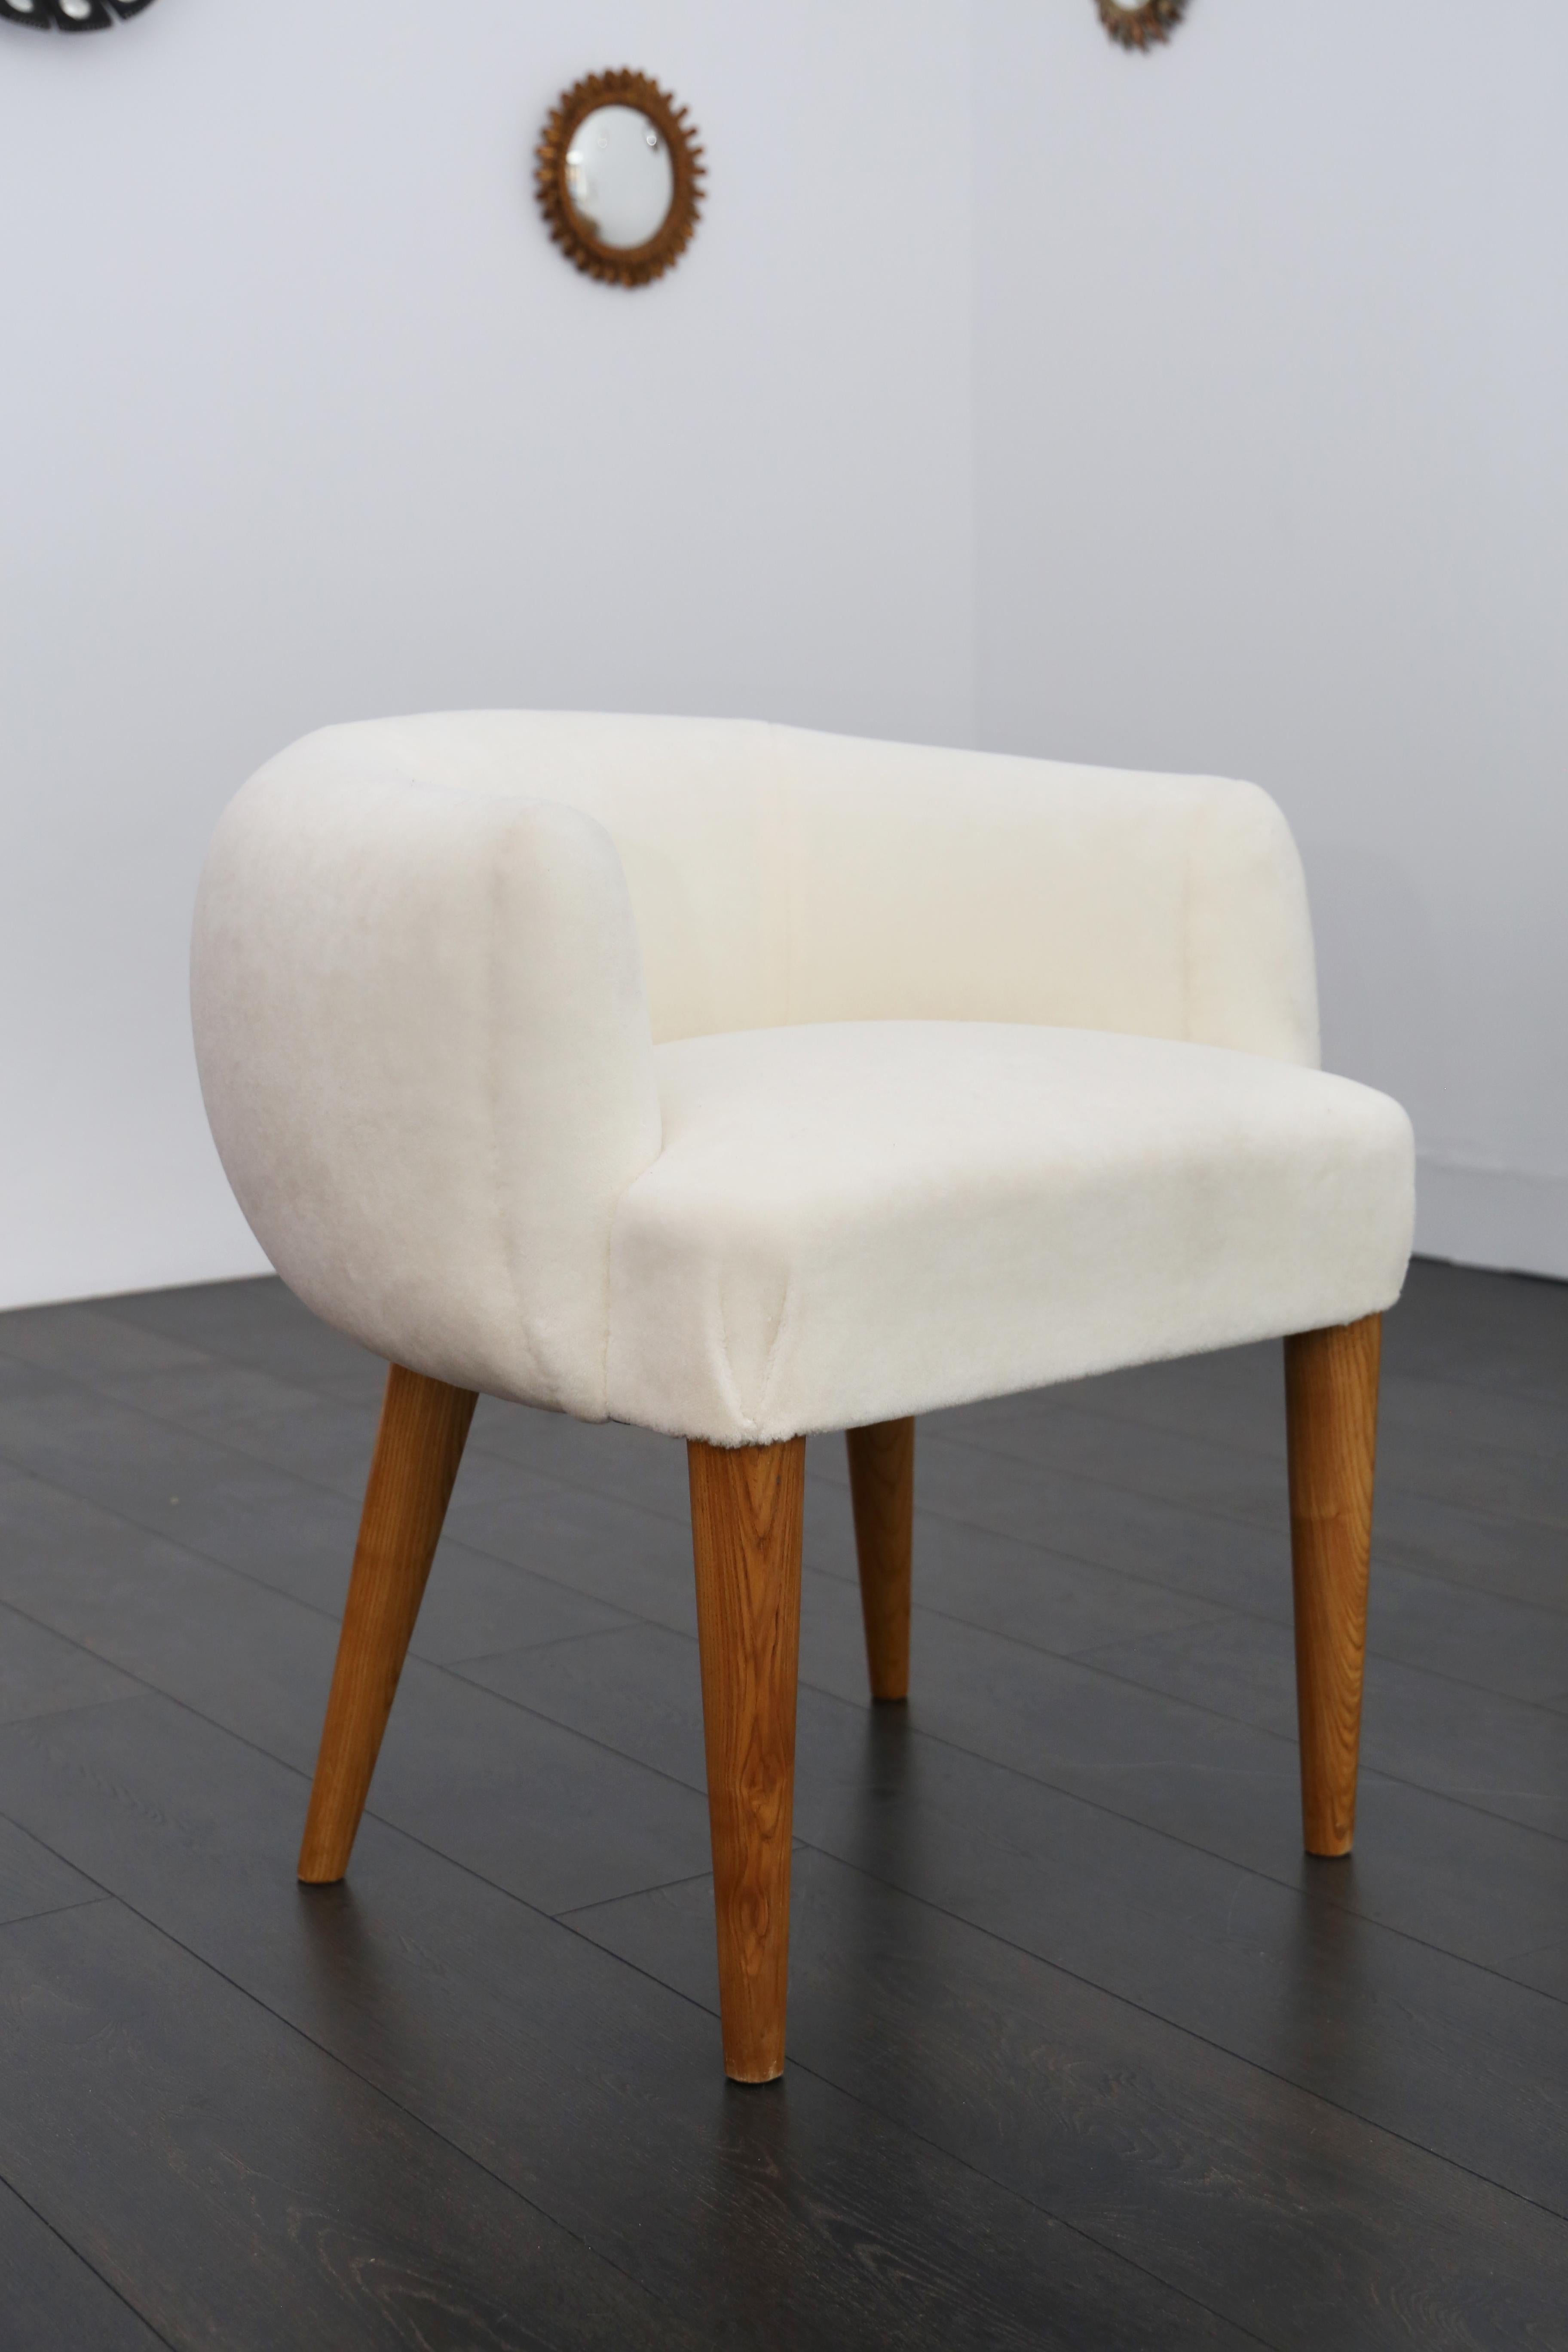 Jean Royère 
'Ours polaire' armchair
1950
Oak and velvet upholstery